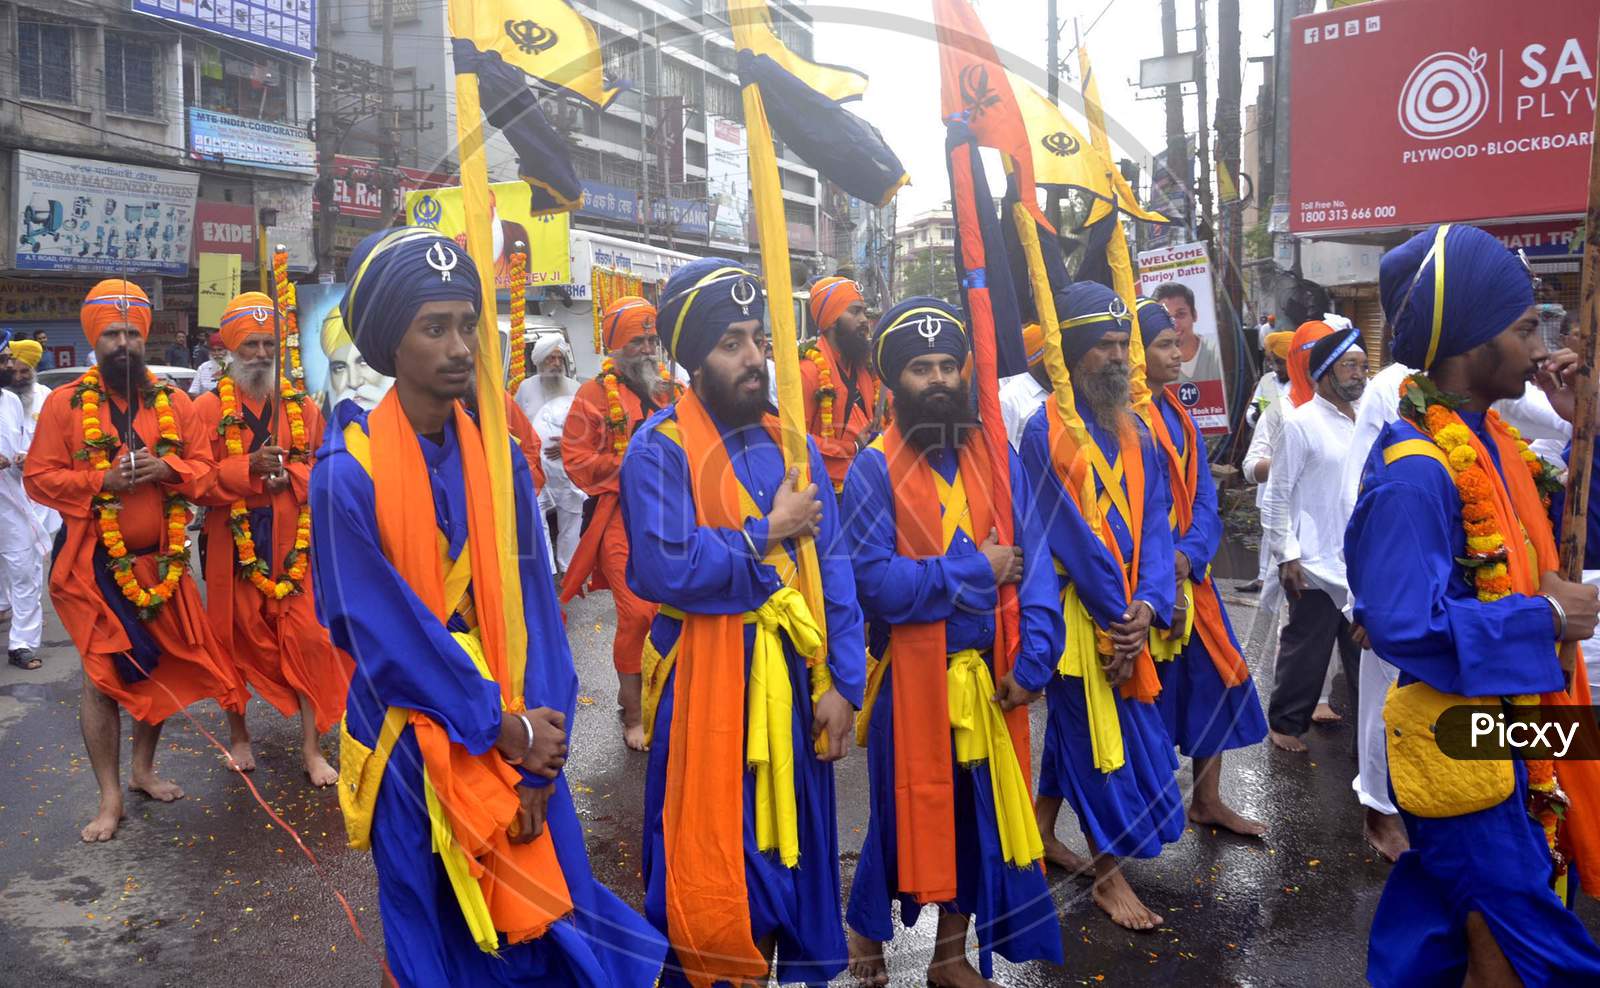 Sikh Devotees taking out a procession